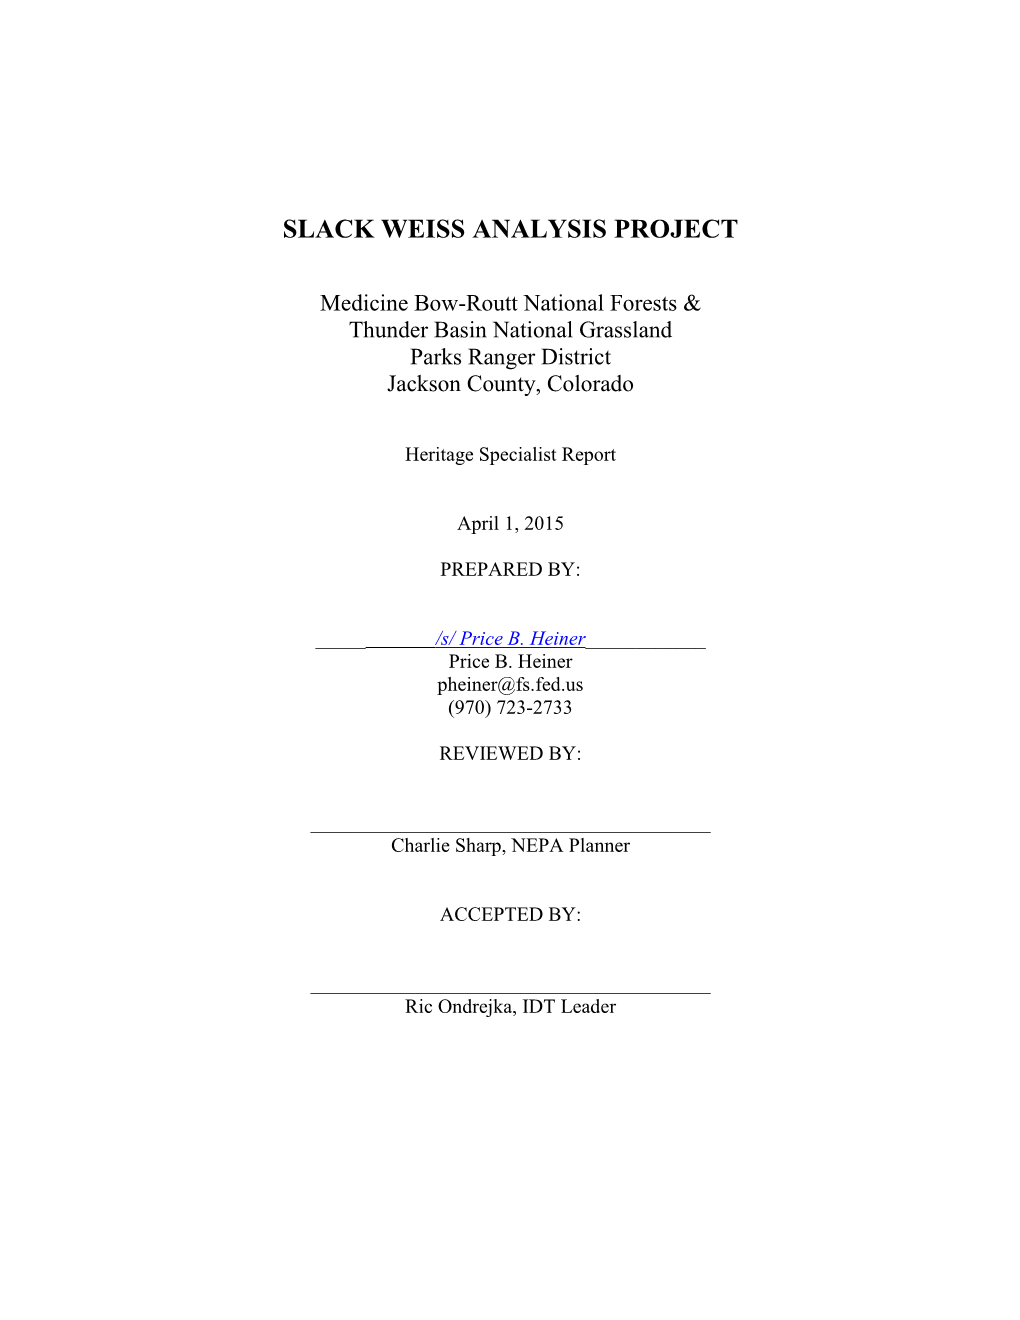 Slack Weiss Analysis Project